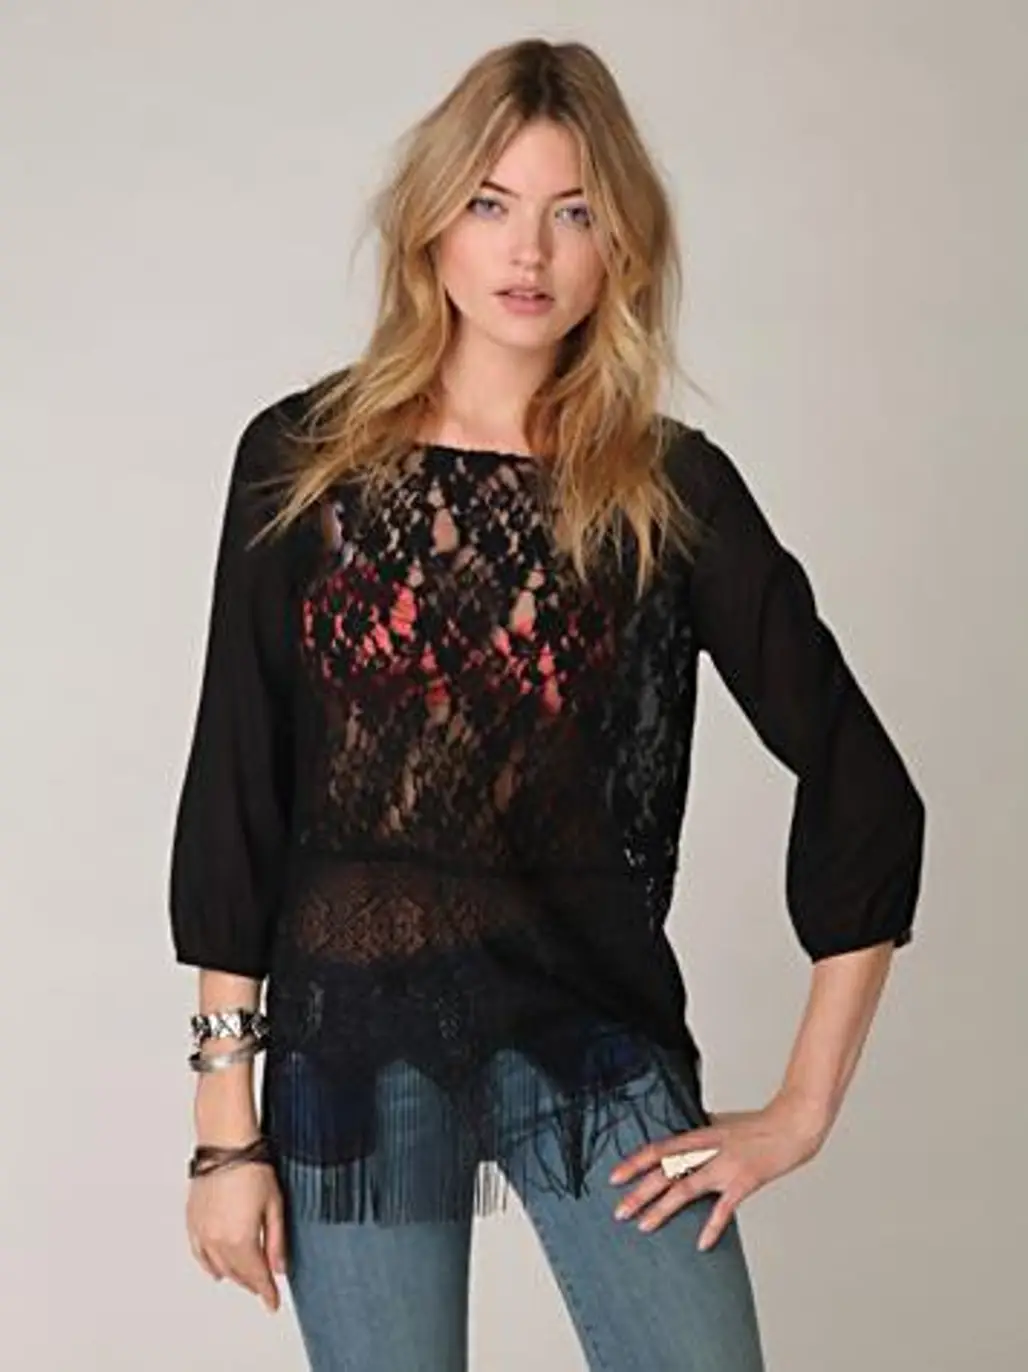 Windows of Lace Top